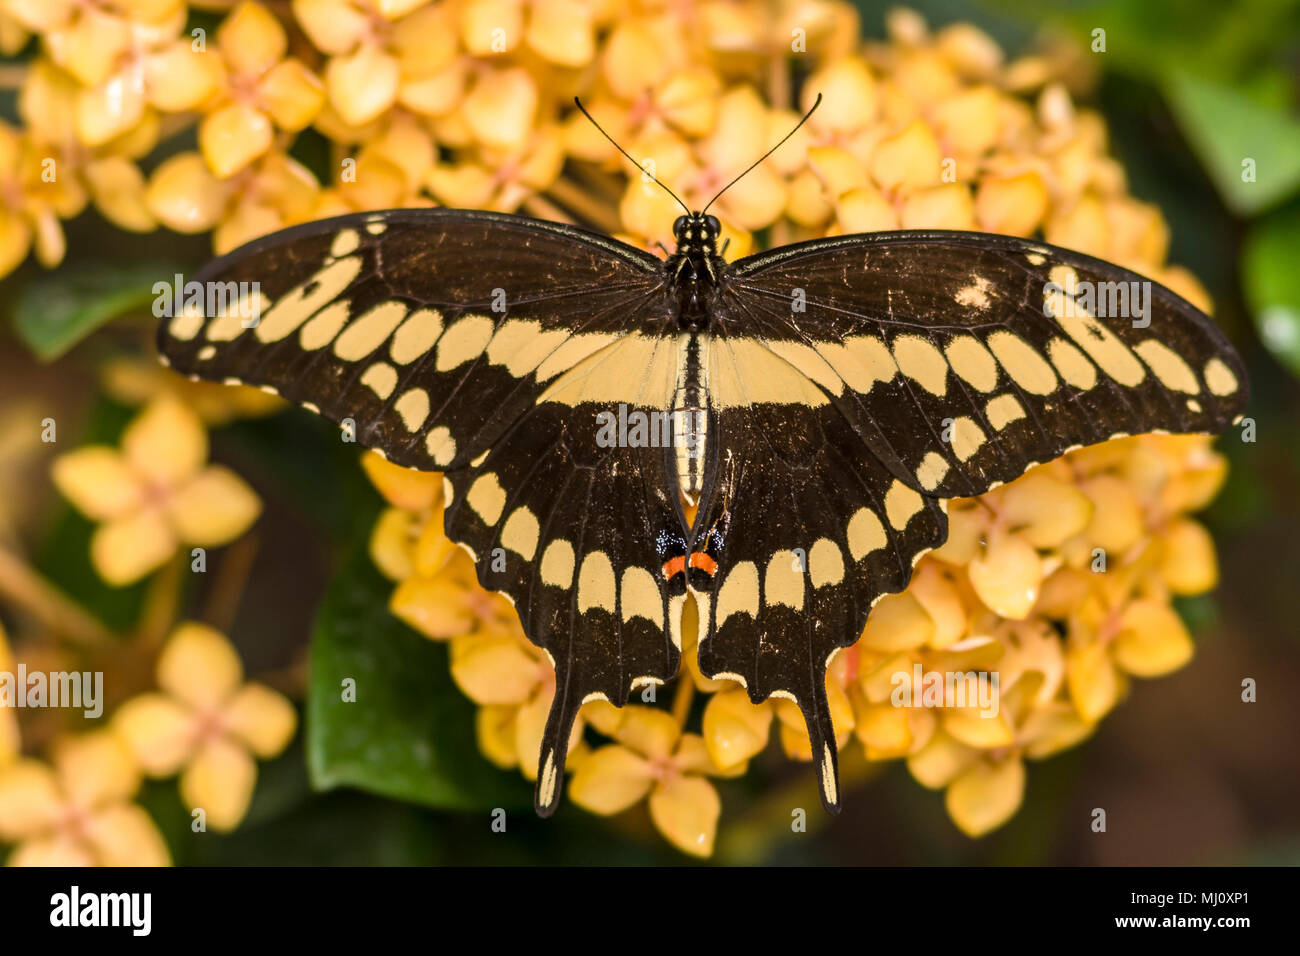 Eastern tiger swallowtail, Papilio glaucus is a species of swallowtail butterfly native to eastern North America Stock Photo